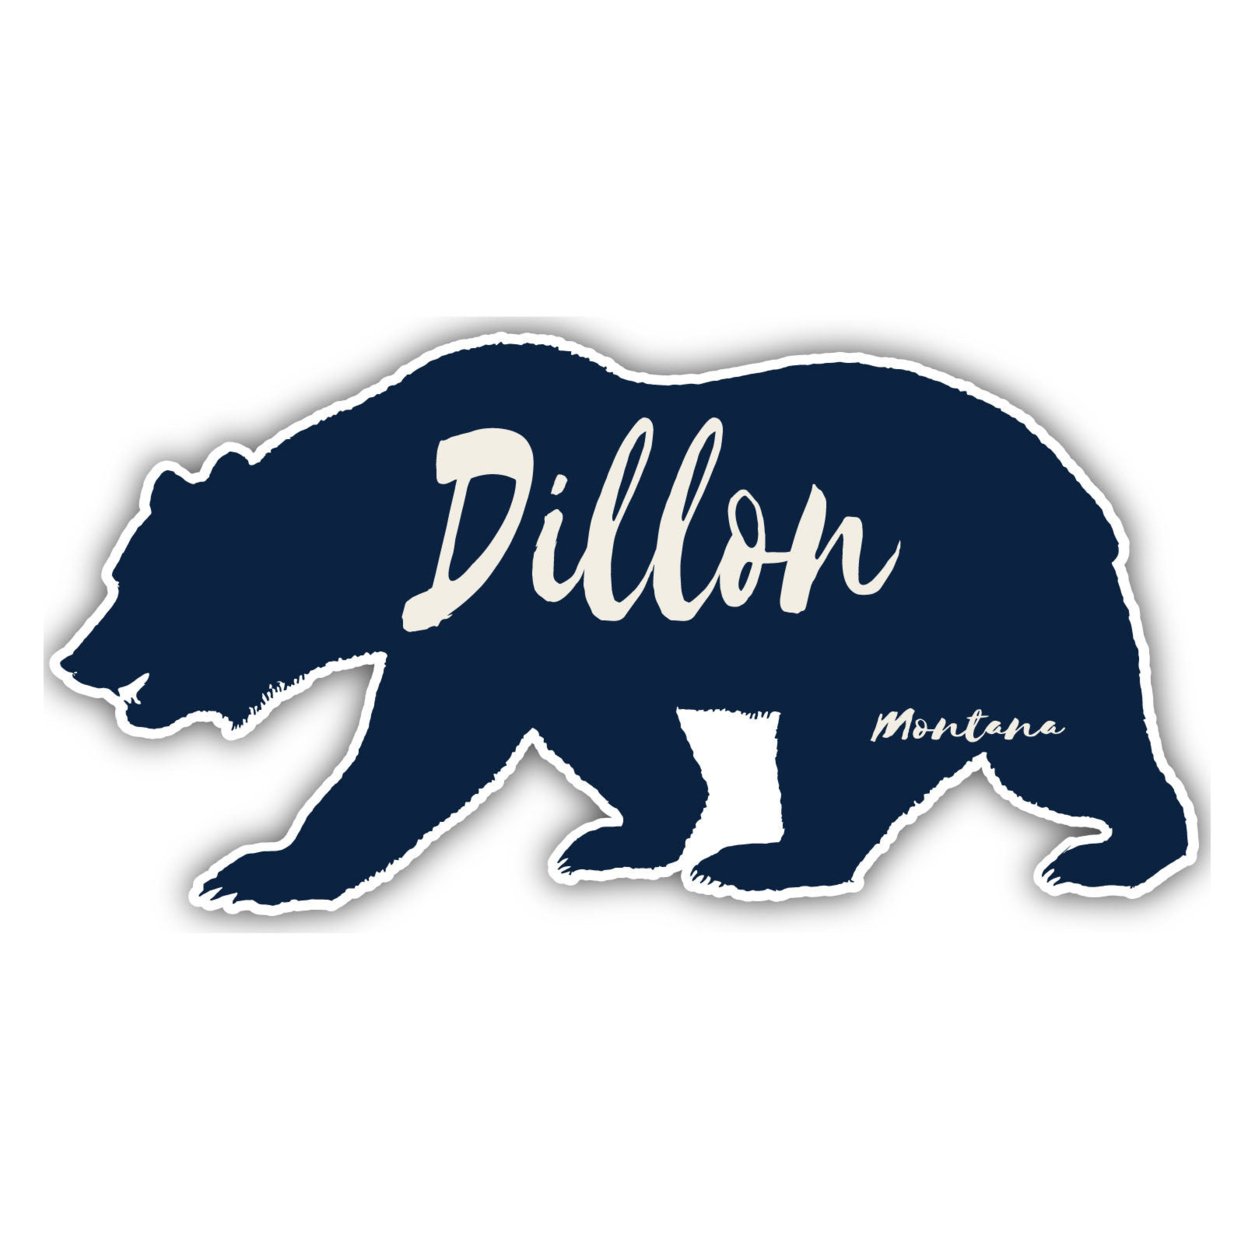 Dillon Montana Souvenir Decorative Stickers (Choose Theme And Size) - 4-Pack, 4-Inch, Camp Life